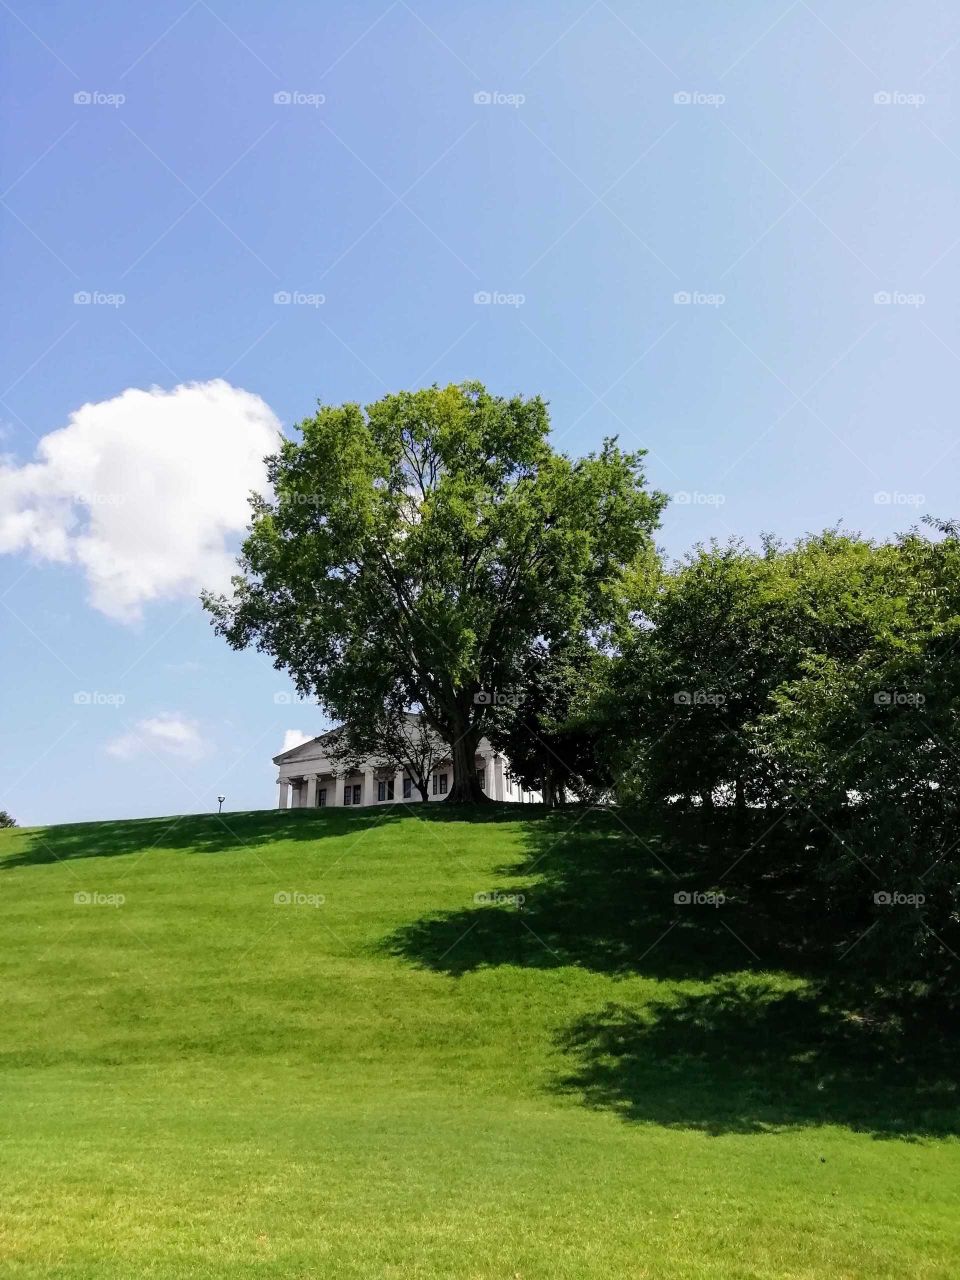 White house surrounded by trees and overlooking the green lawn